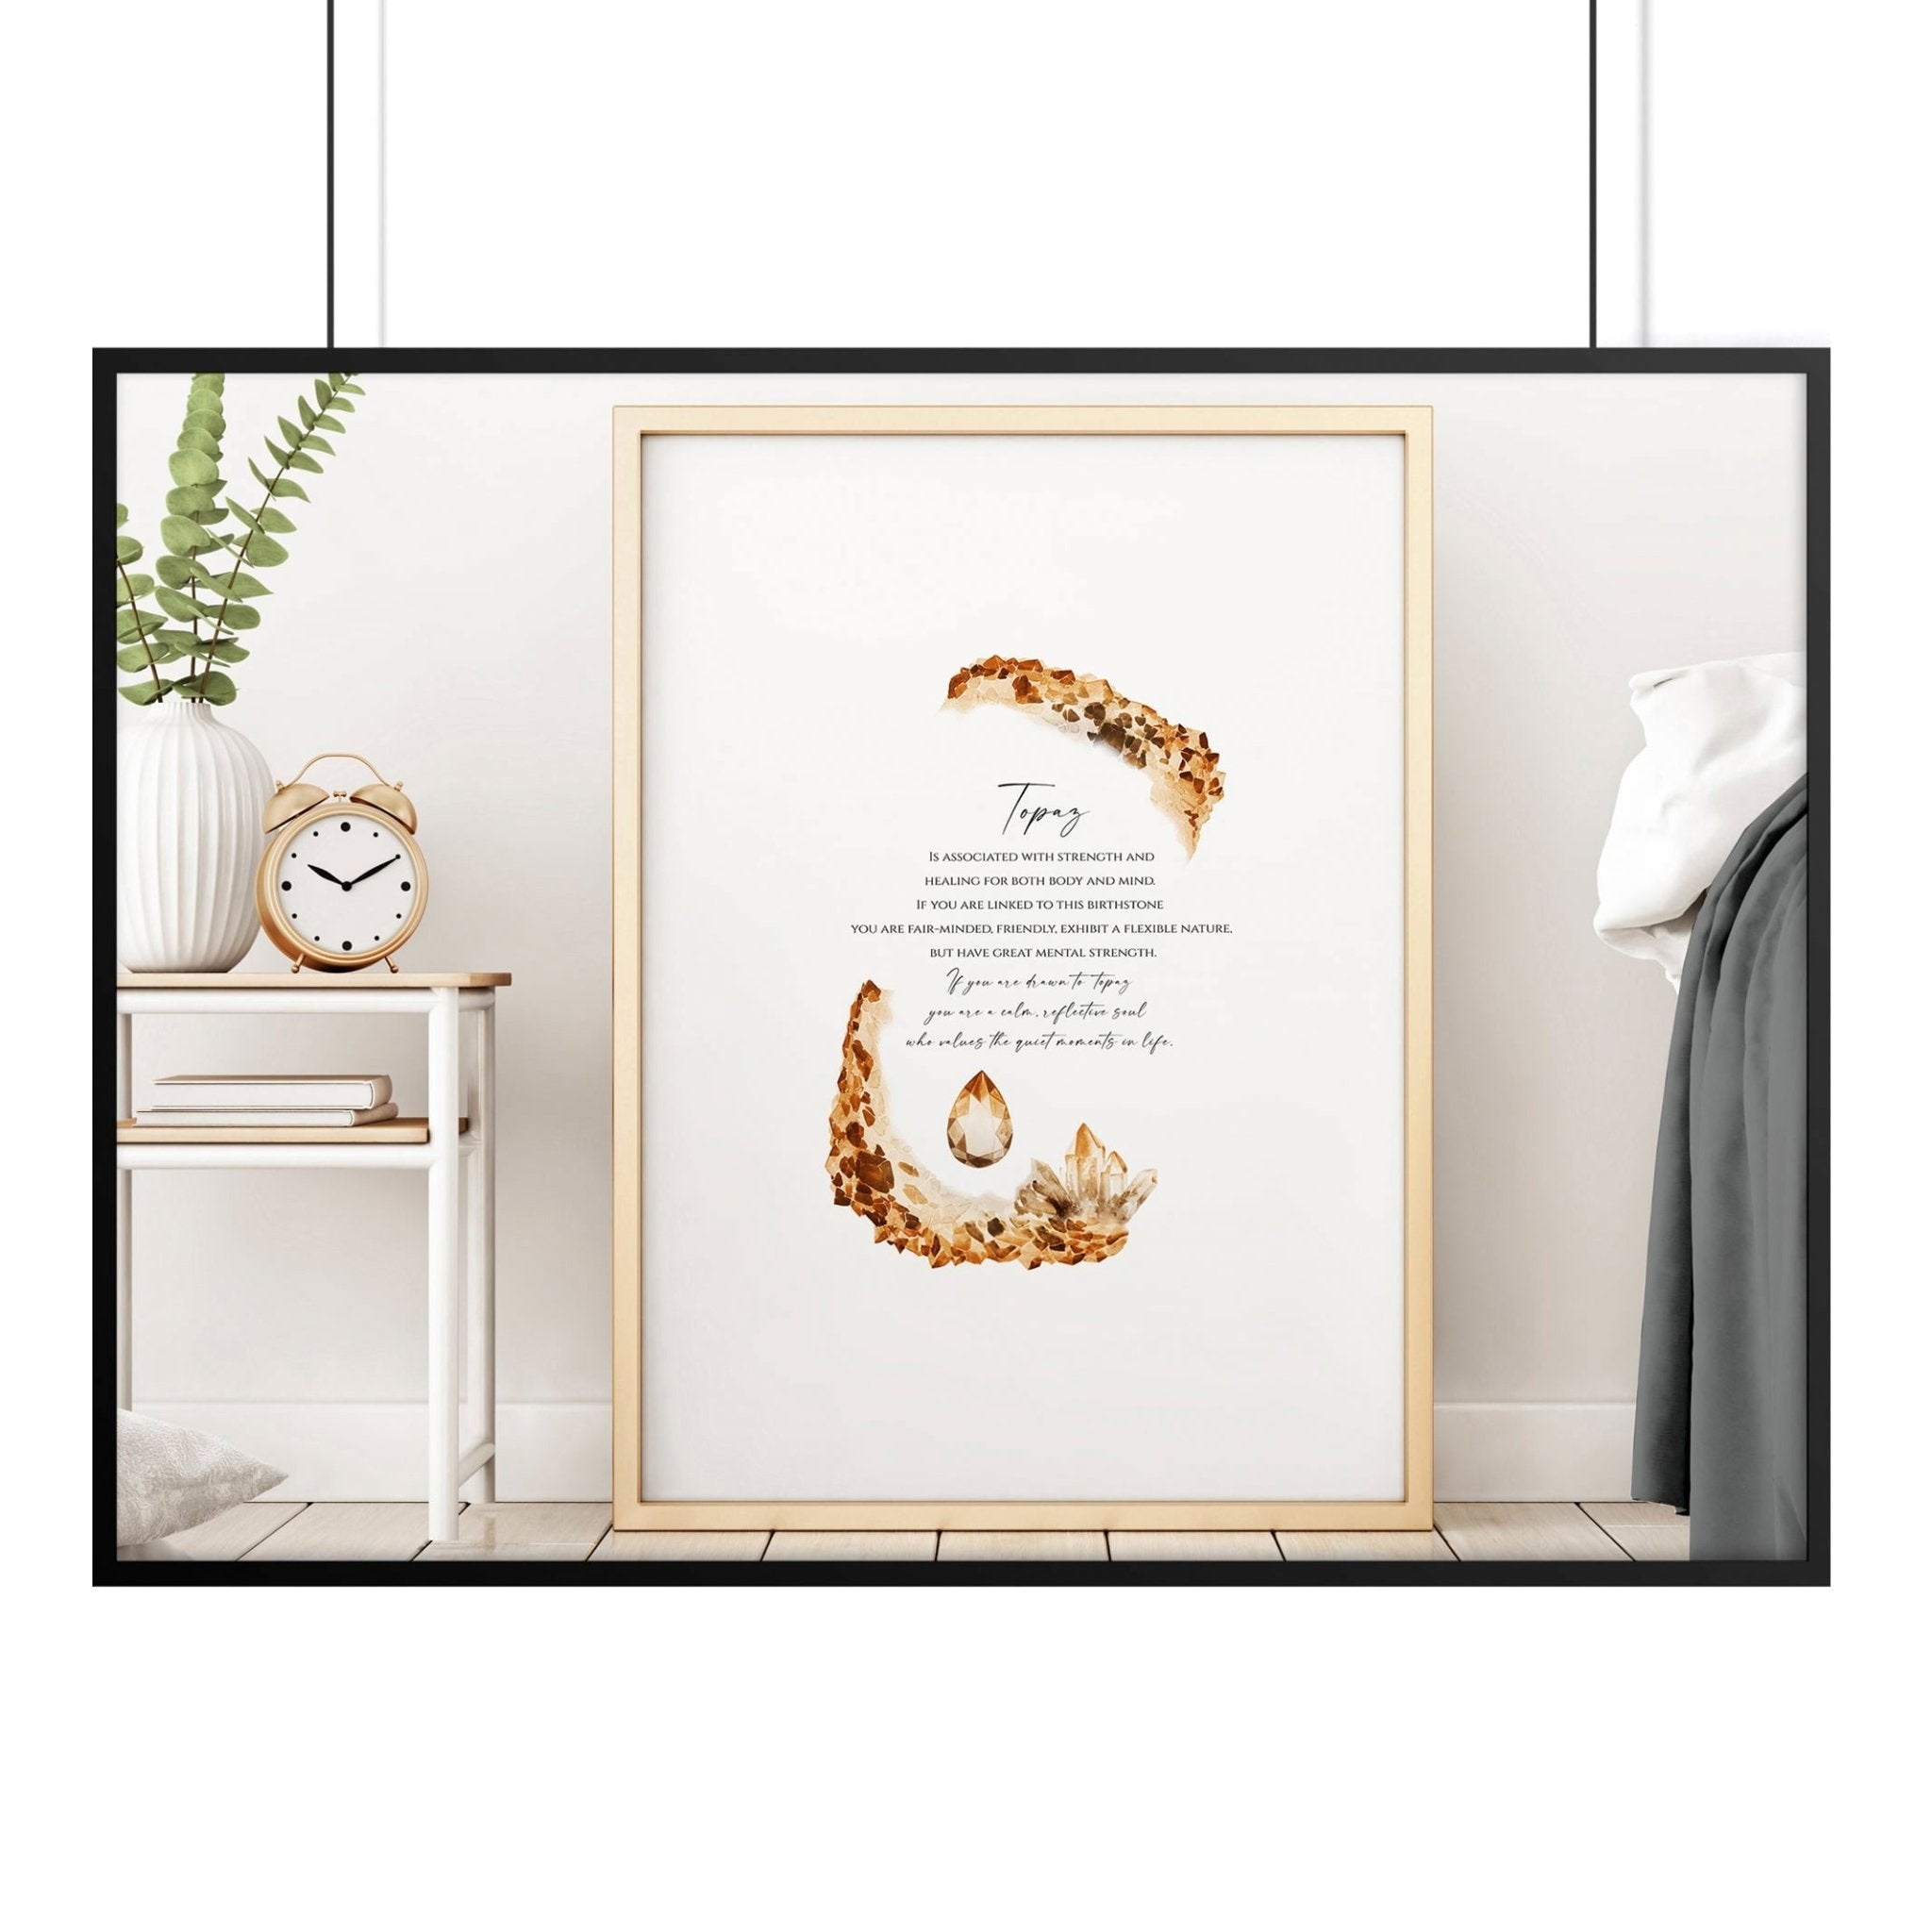 Birthstone Gifts That Aren't Jewelry - About Wall Art